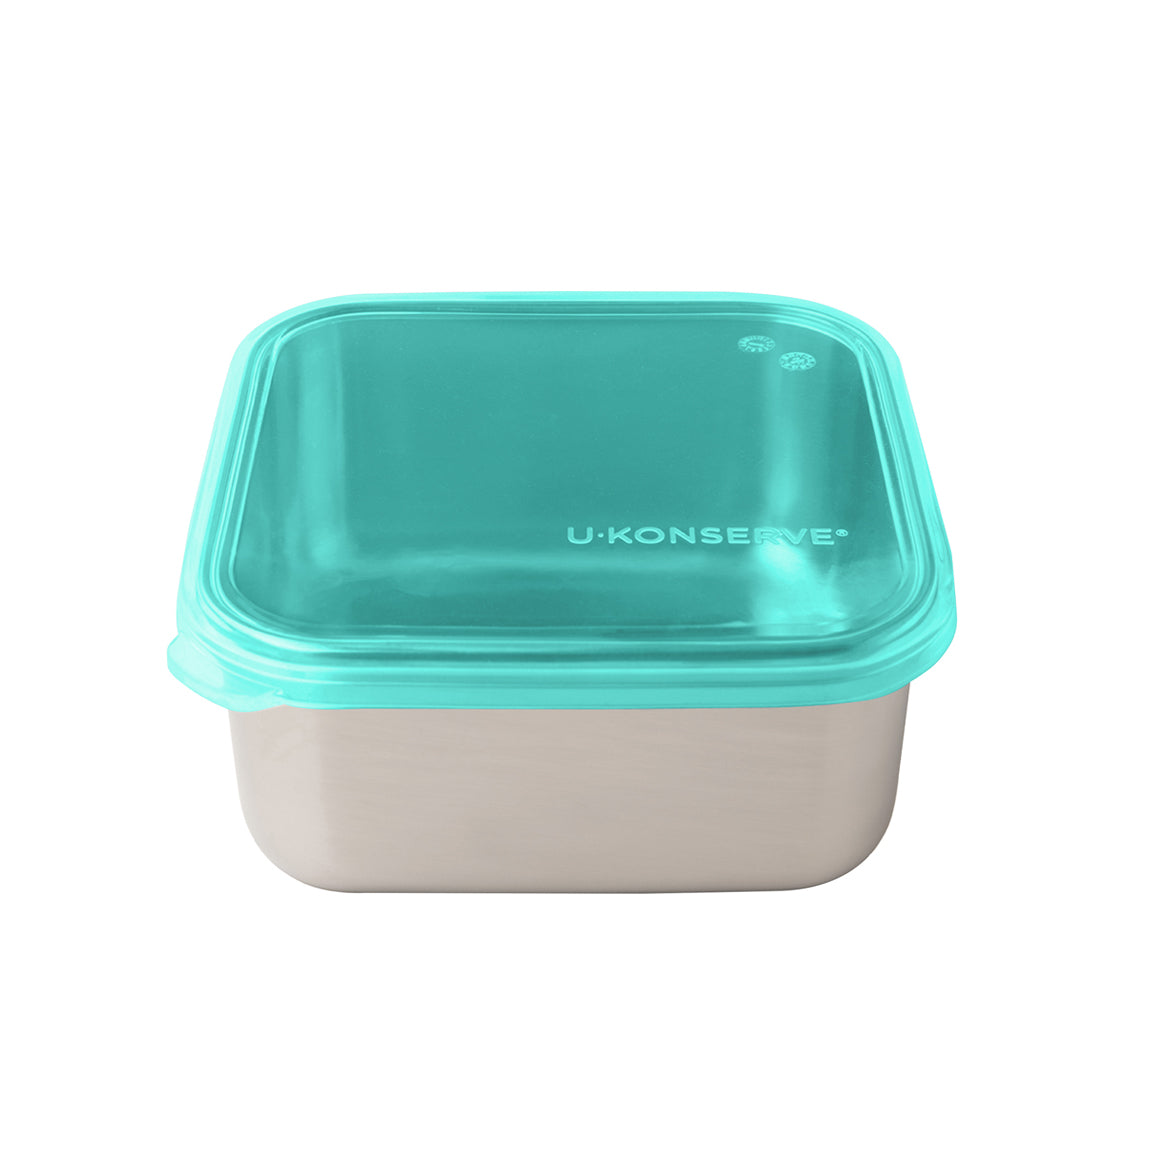 U Konserve Square 30oz Stainless Steel Container with Silicone Lid in Island Teal